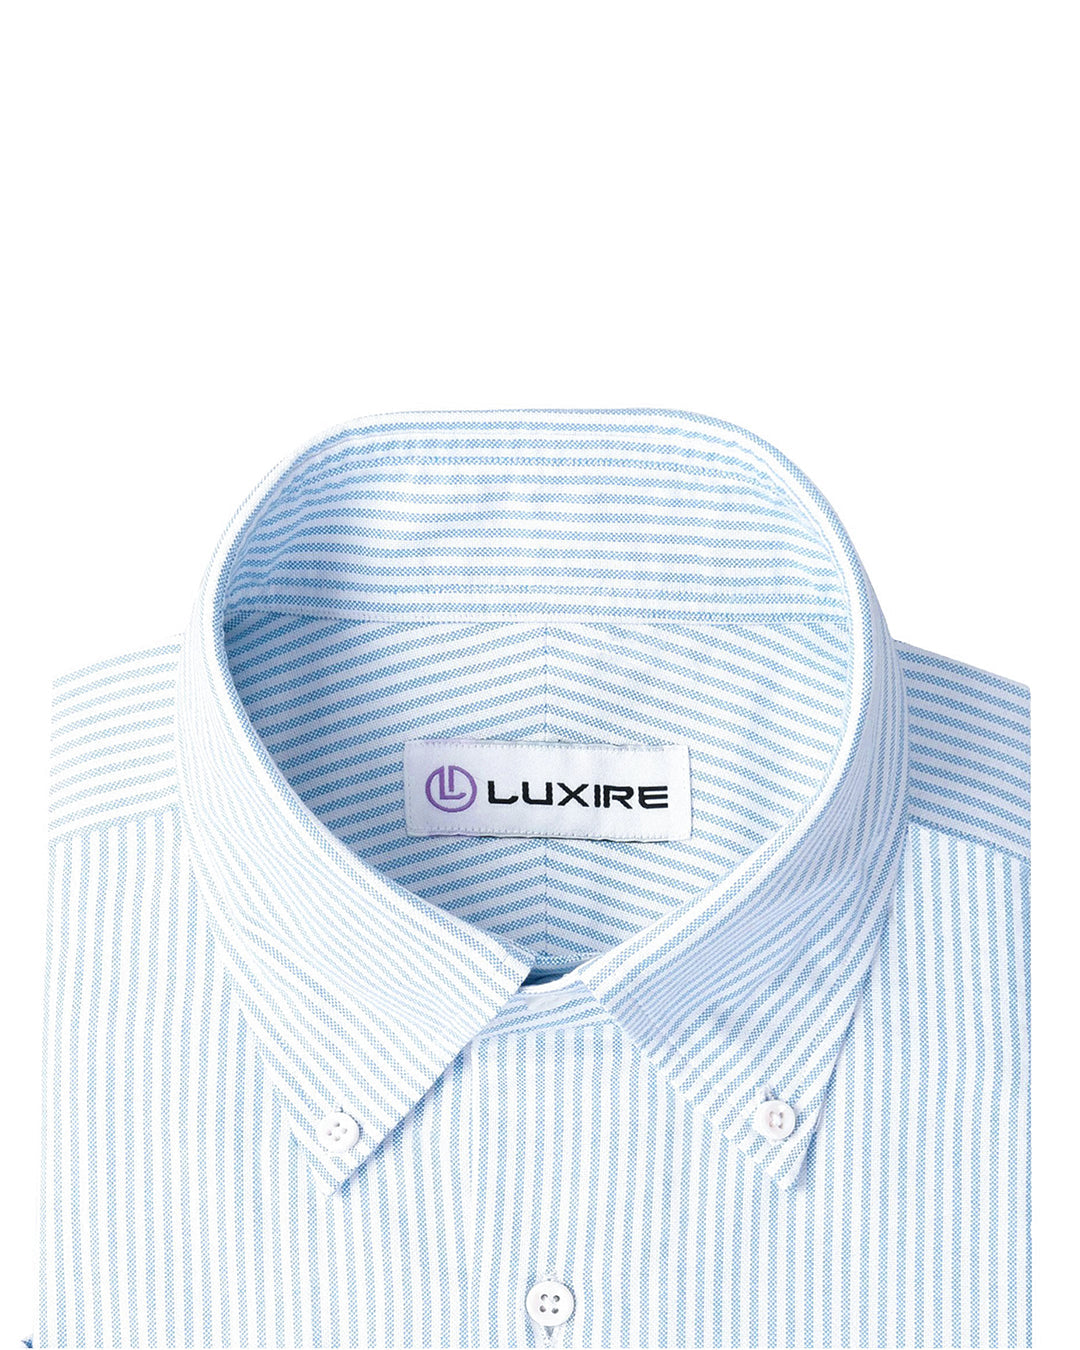 Collar of the custom oxford shirt for men by Luxire in white with light blue stripes